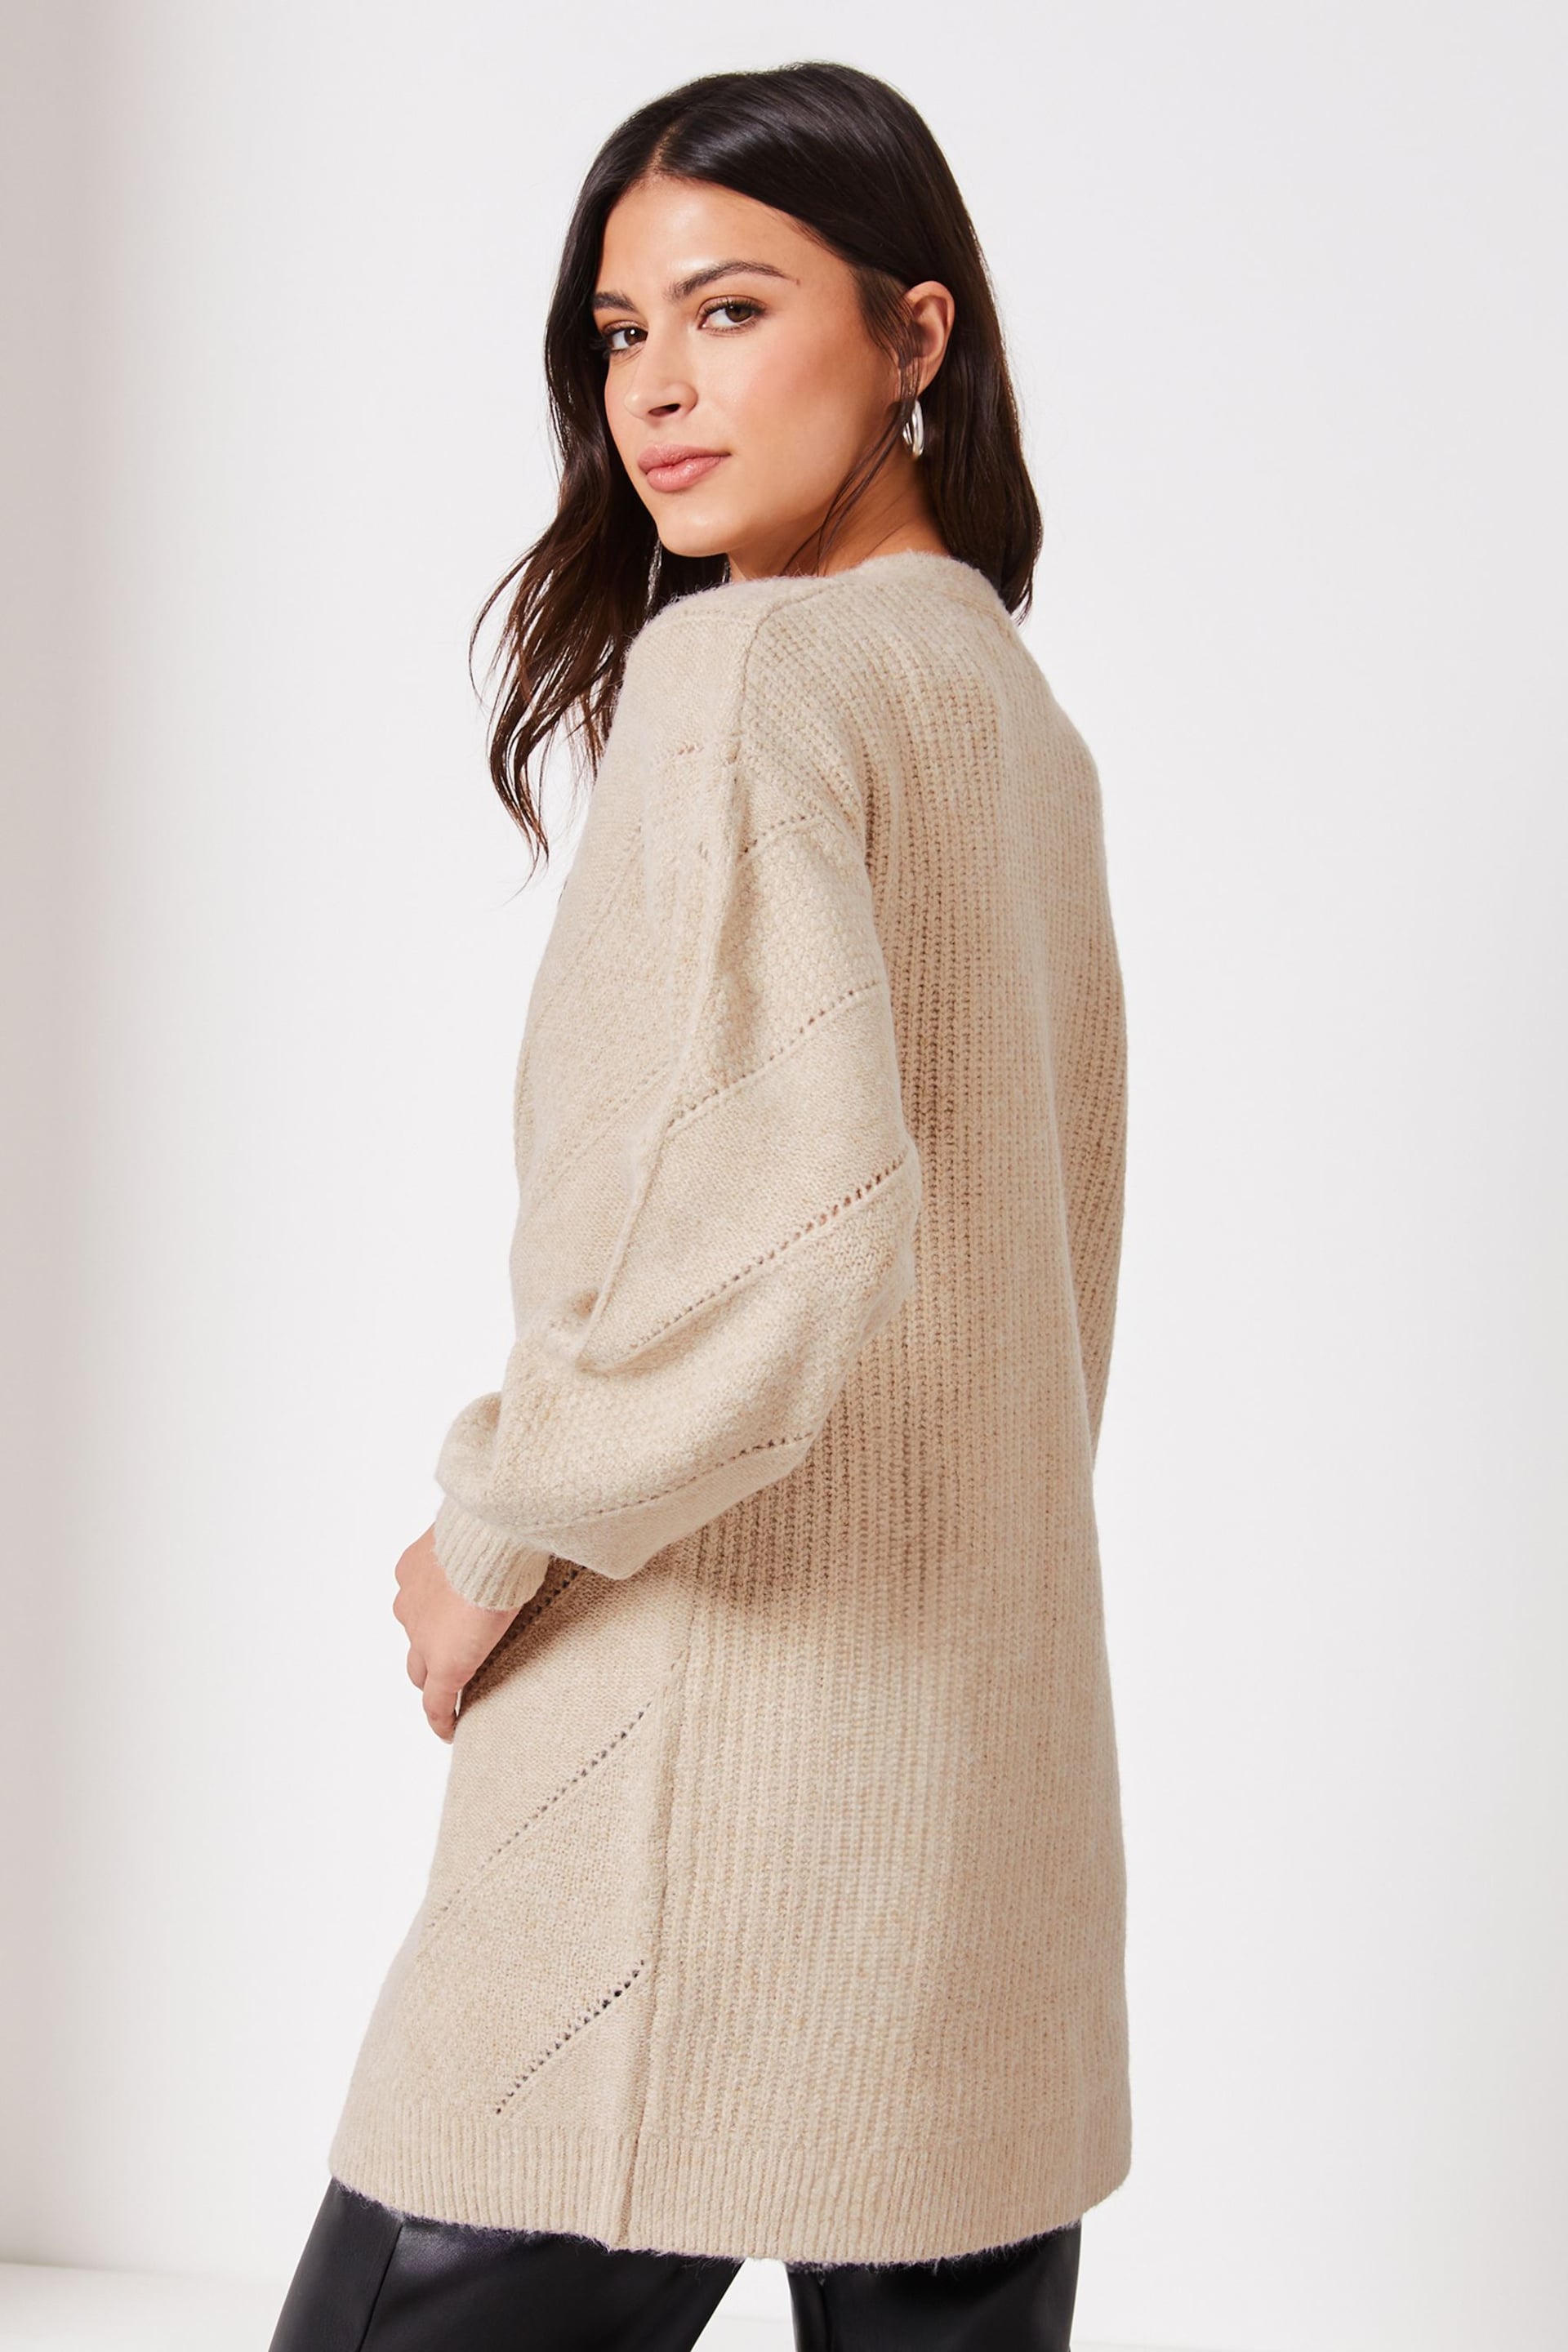 Lipsy Neutral Petite Long Sleeve Pointelle Knitted Cardigan - Image 2 of 4